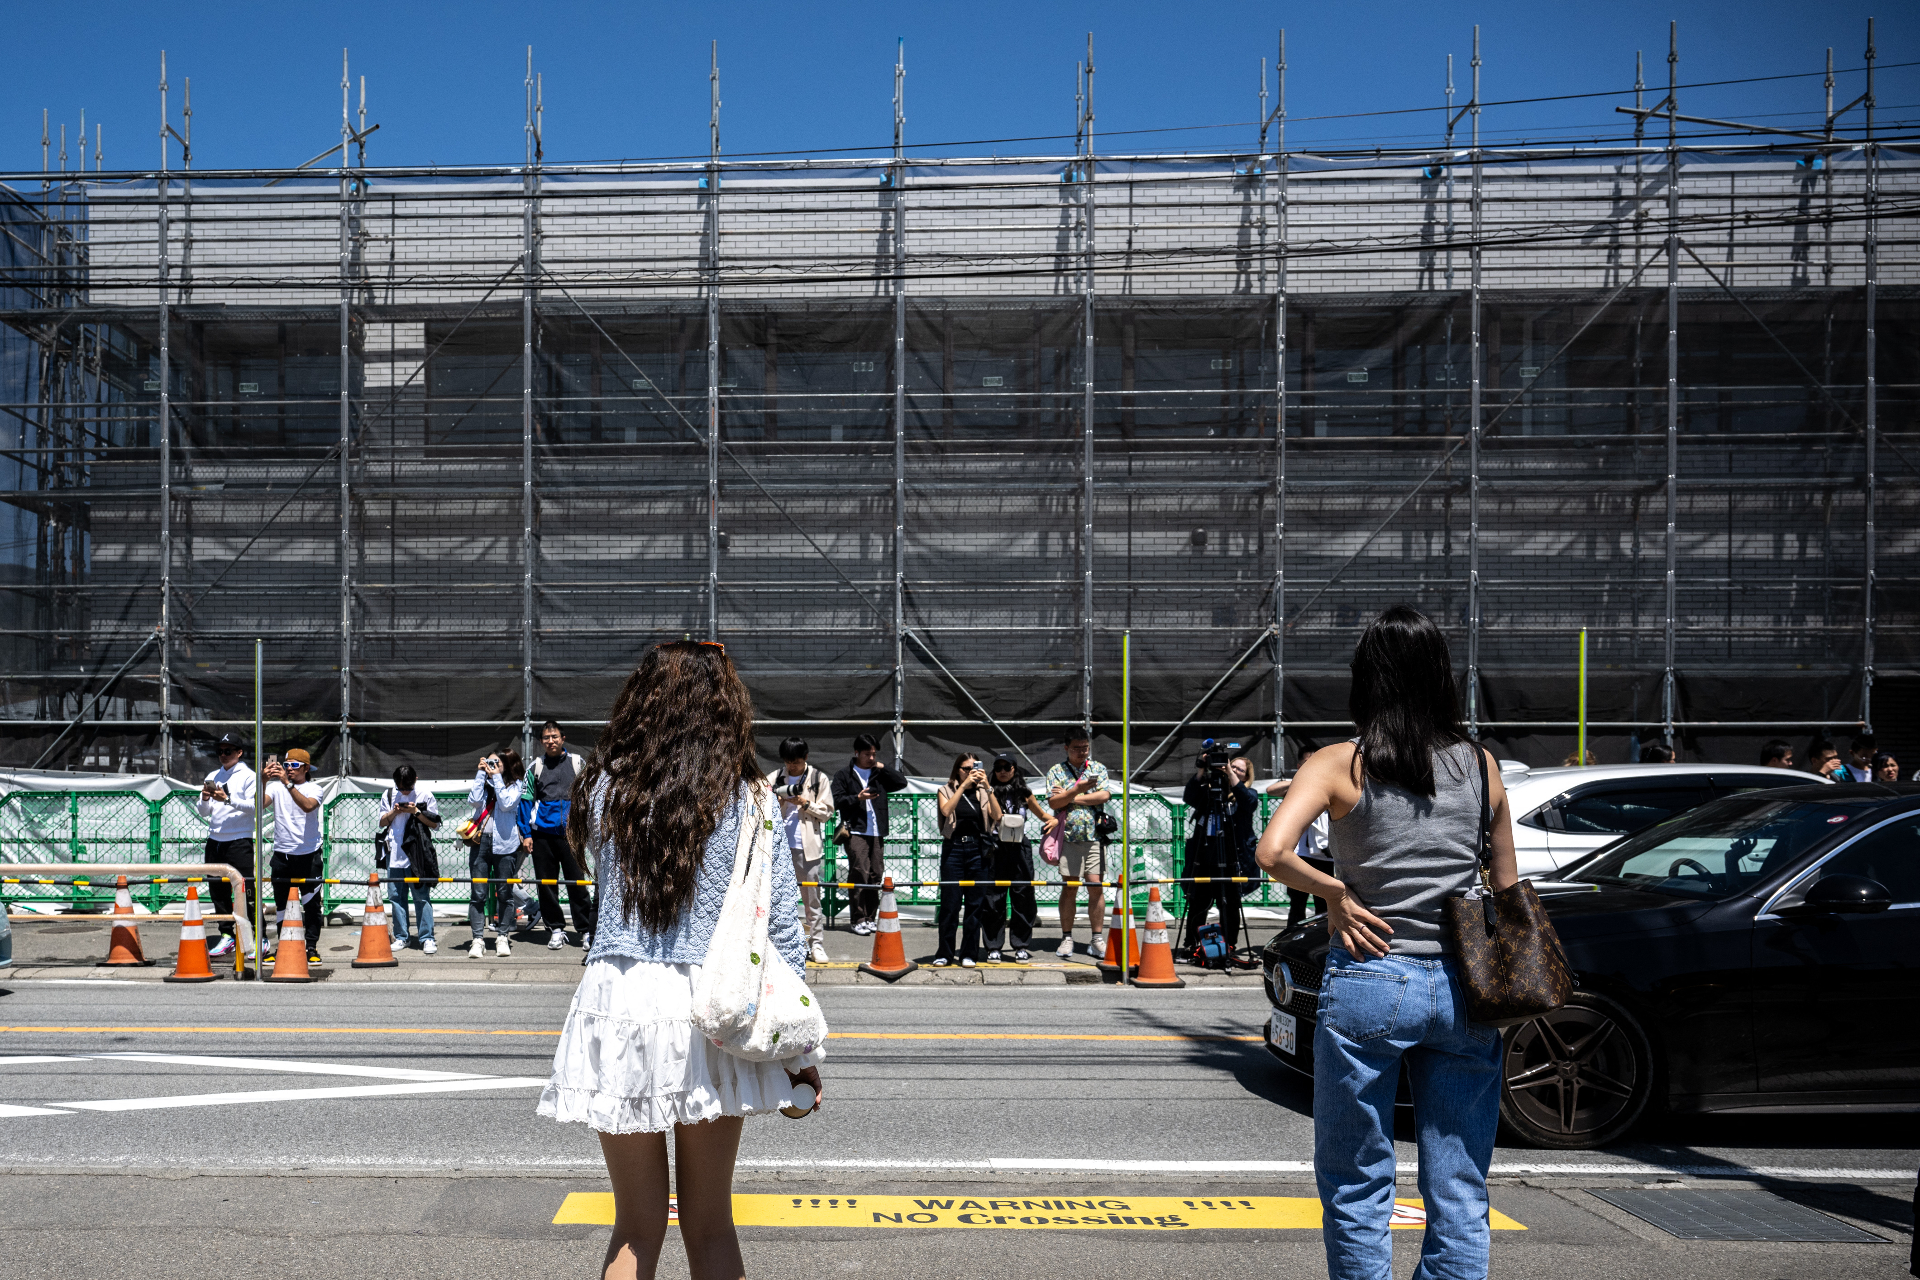 <p>Fujikawaguchiko town is taking drastic actions to deal with over-tourism by building an 8-foot-high wall to block the view of iconic Mount Fuji from a convenience store.</p>